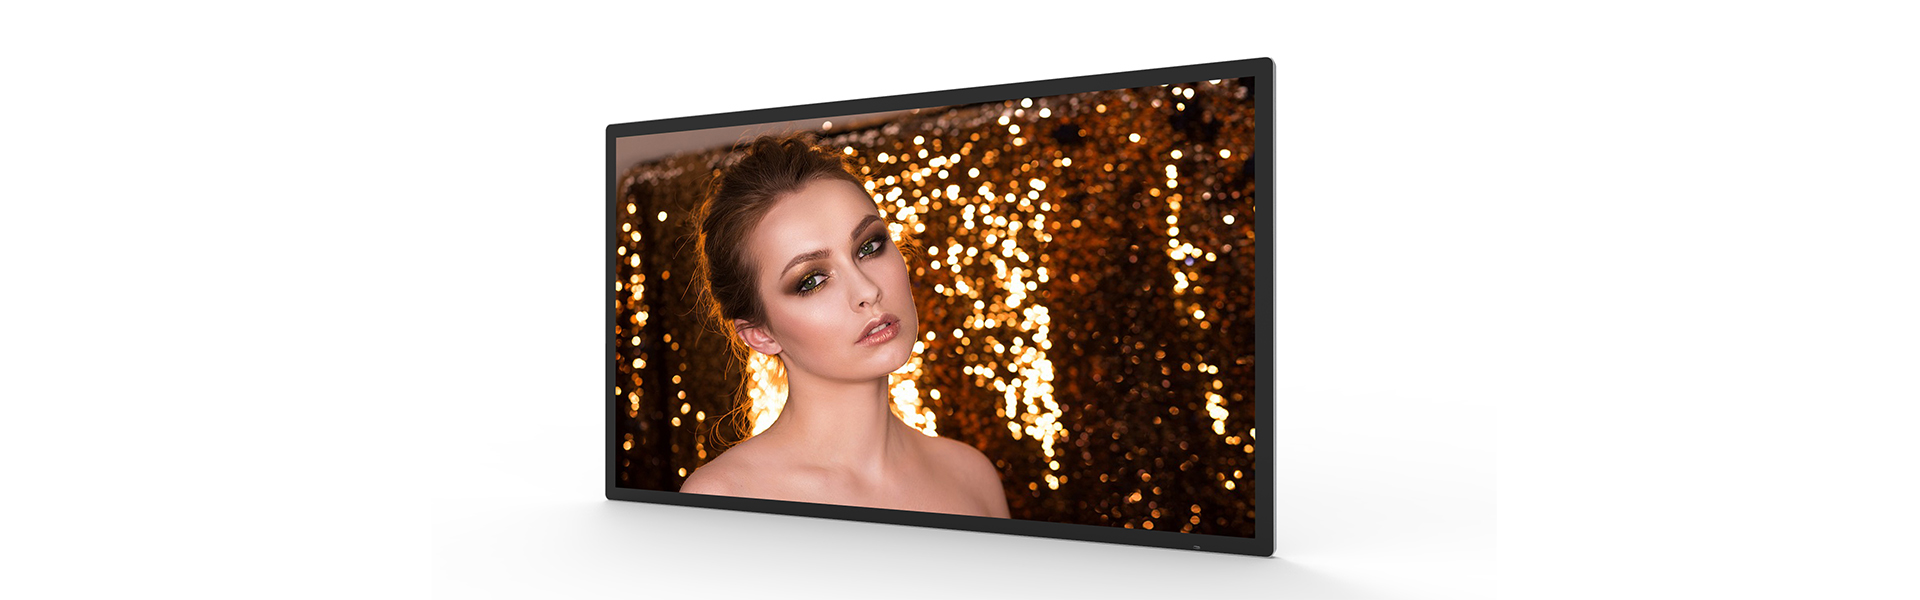 Touch Screen Digital Signage - No.521OC